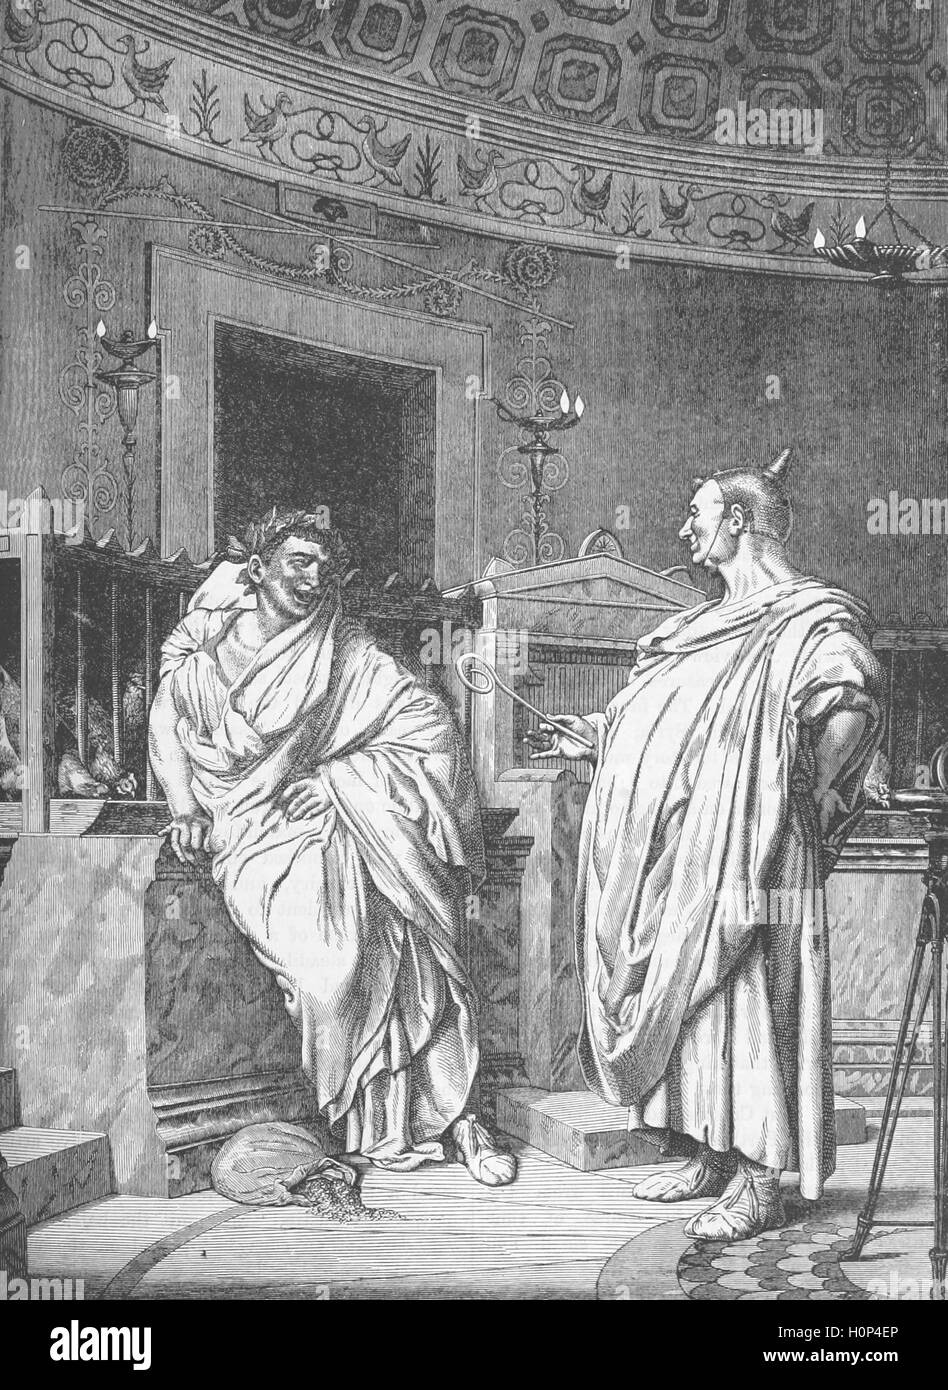 Two Roman Augurs.   The augur was a priest and official in the classical Roman world. His main role was the practice of augury, interpreting the will of the gods by studying the flight of birds: whether they are flying in groups or alone, what noises they make as they fly, direction of flight and what kind of birds they are.  Image sourced from Cassell's Illustrated Universal History (1893). Stock Photo